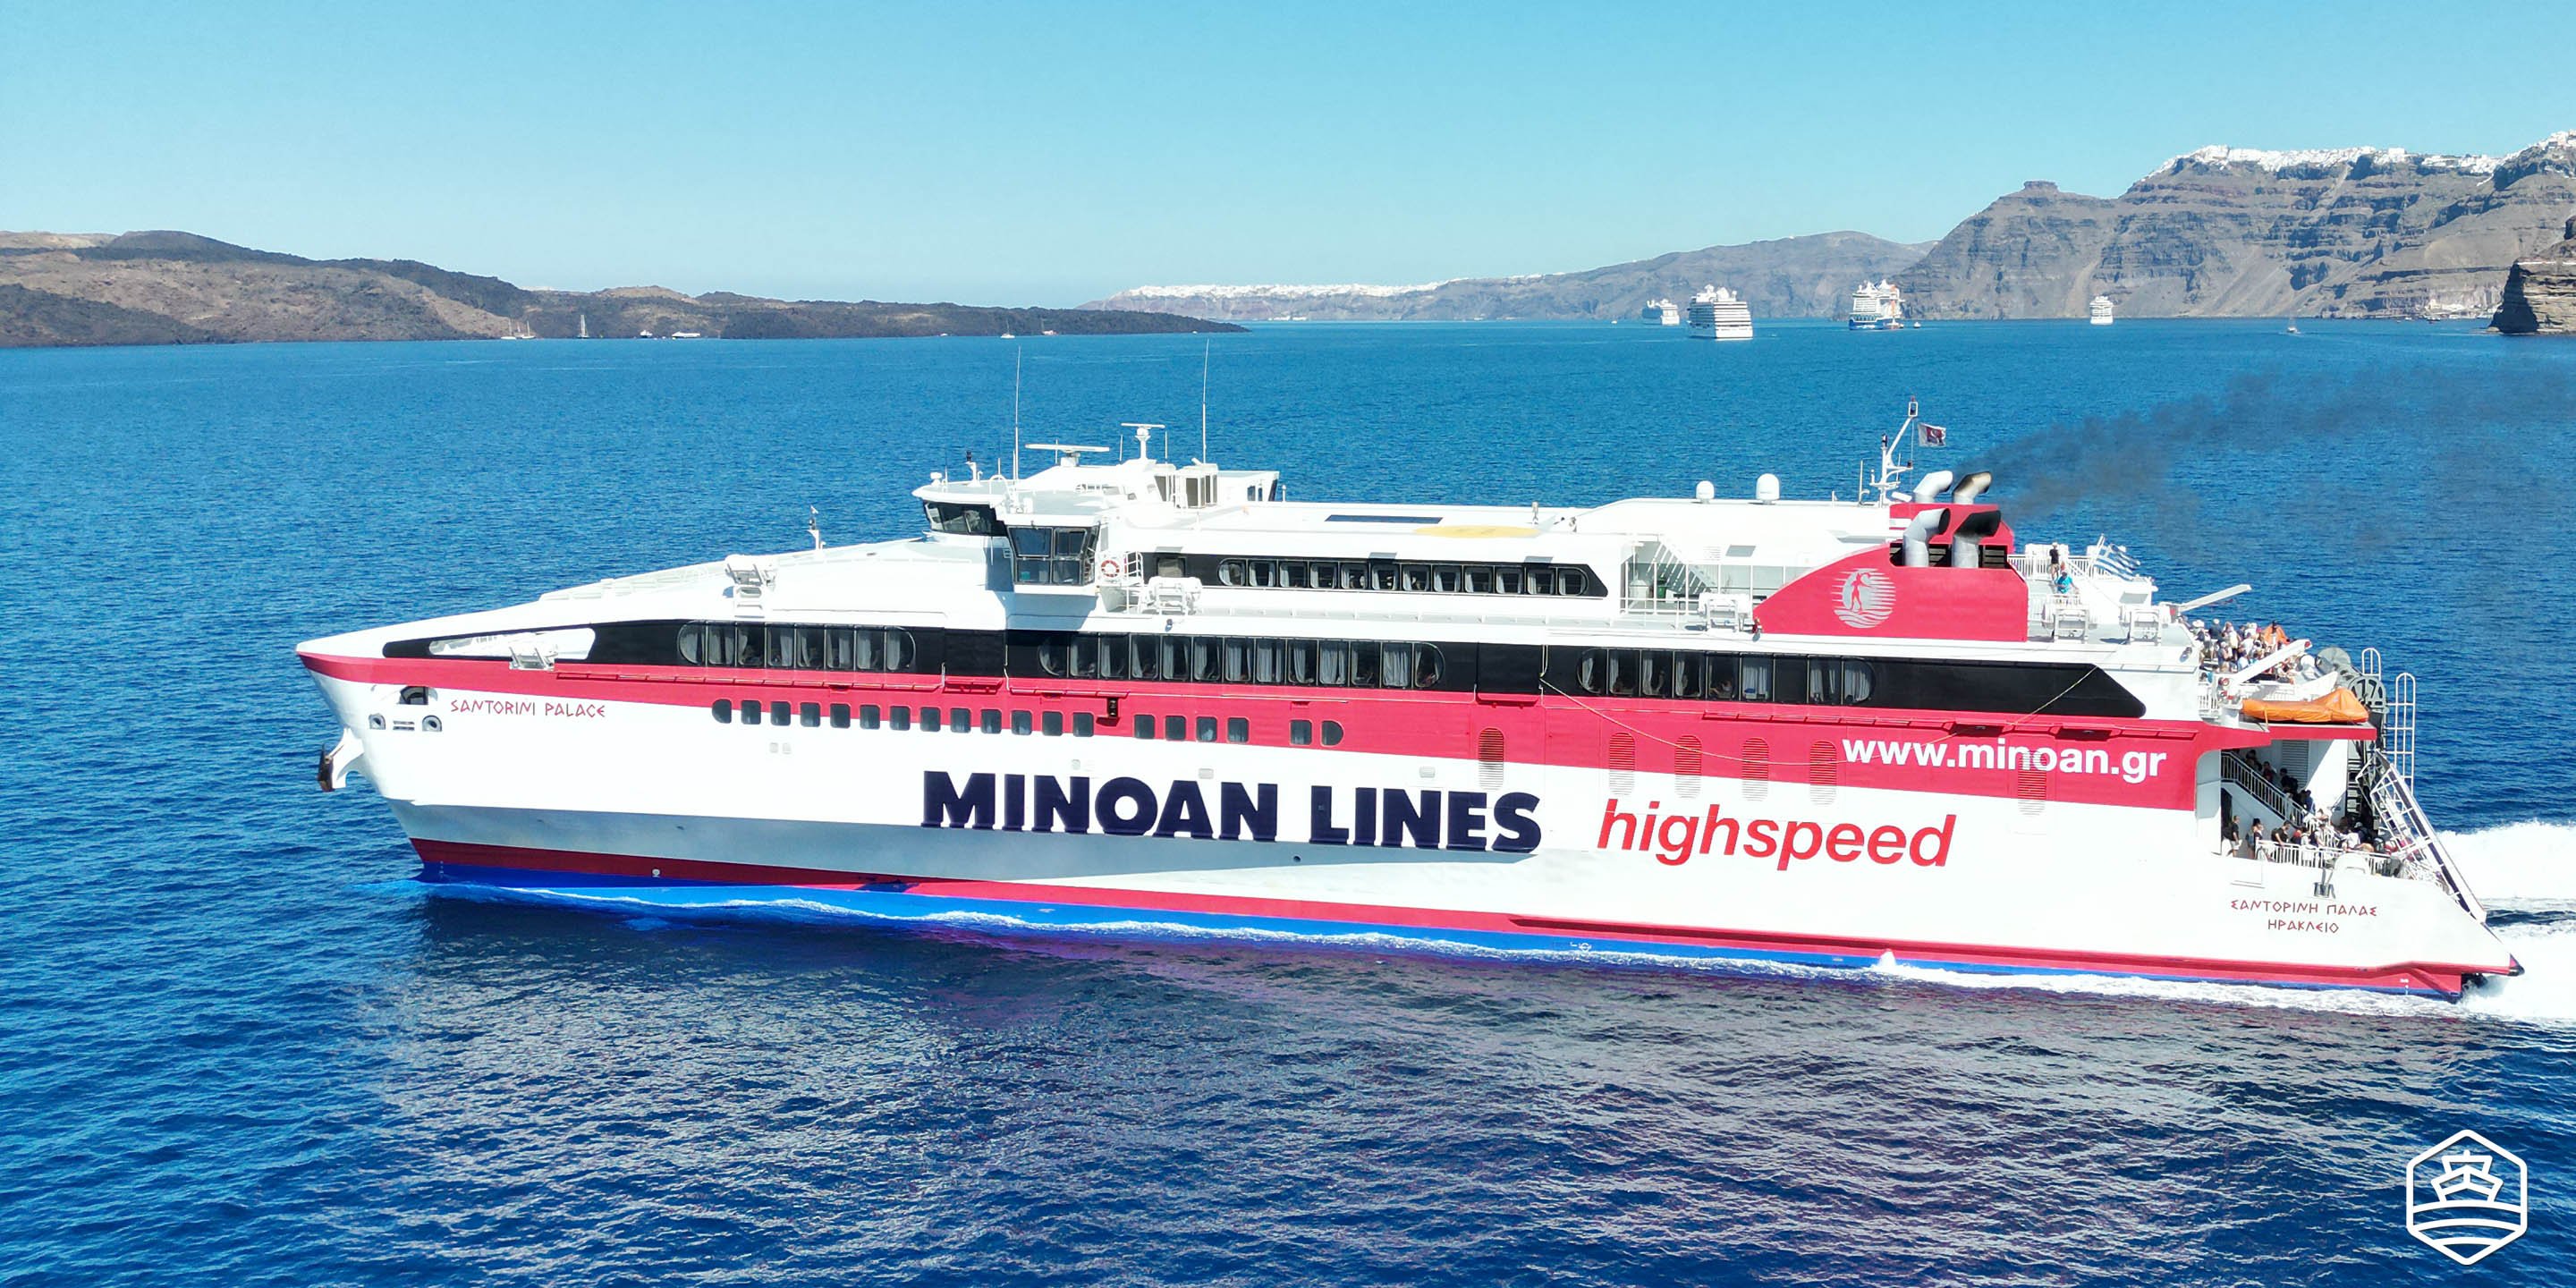 The high-speed ferry Santorini Palace of Minoan Lines leaving the port of Athinios in Santorini for Heraklion in Crete